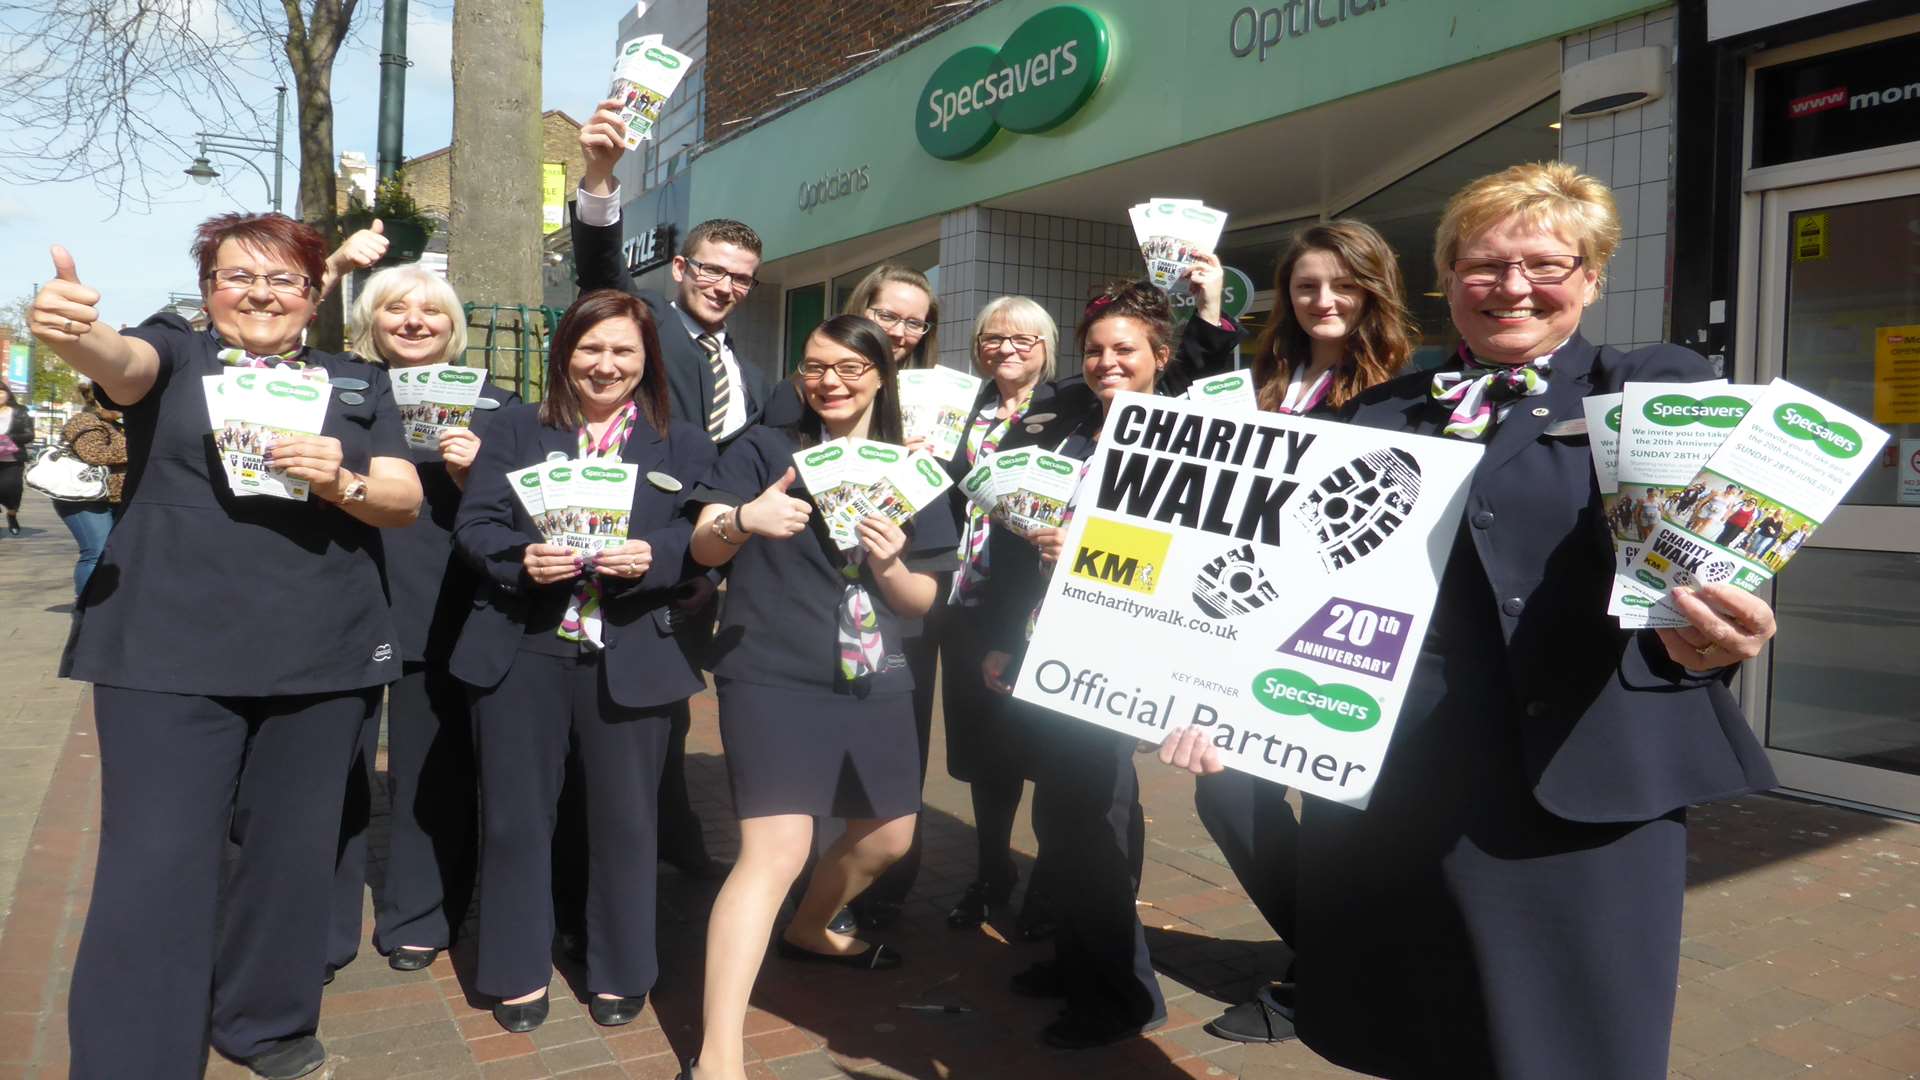 Yve Dixon and staff from the Chatham branch of Specsavers are backing the KM Charity Walk 2015